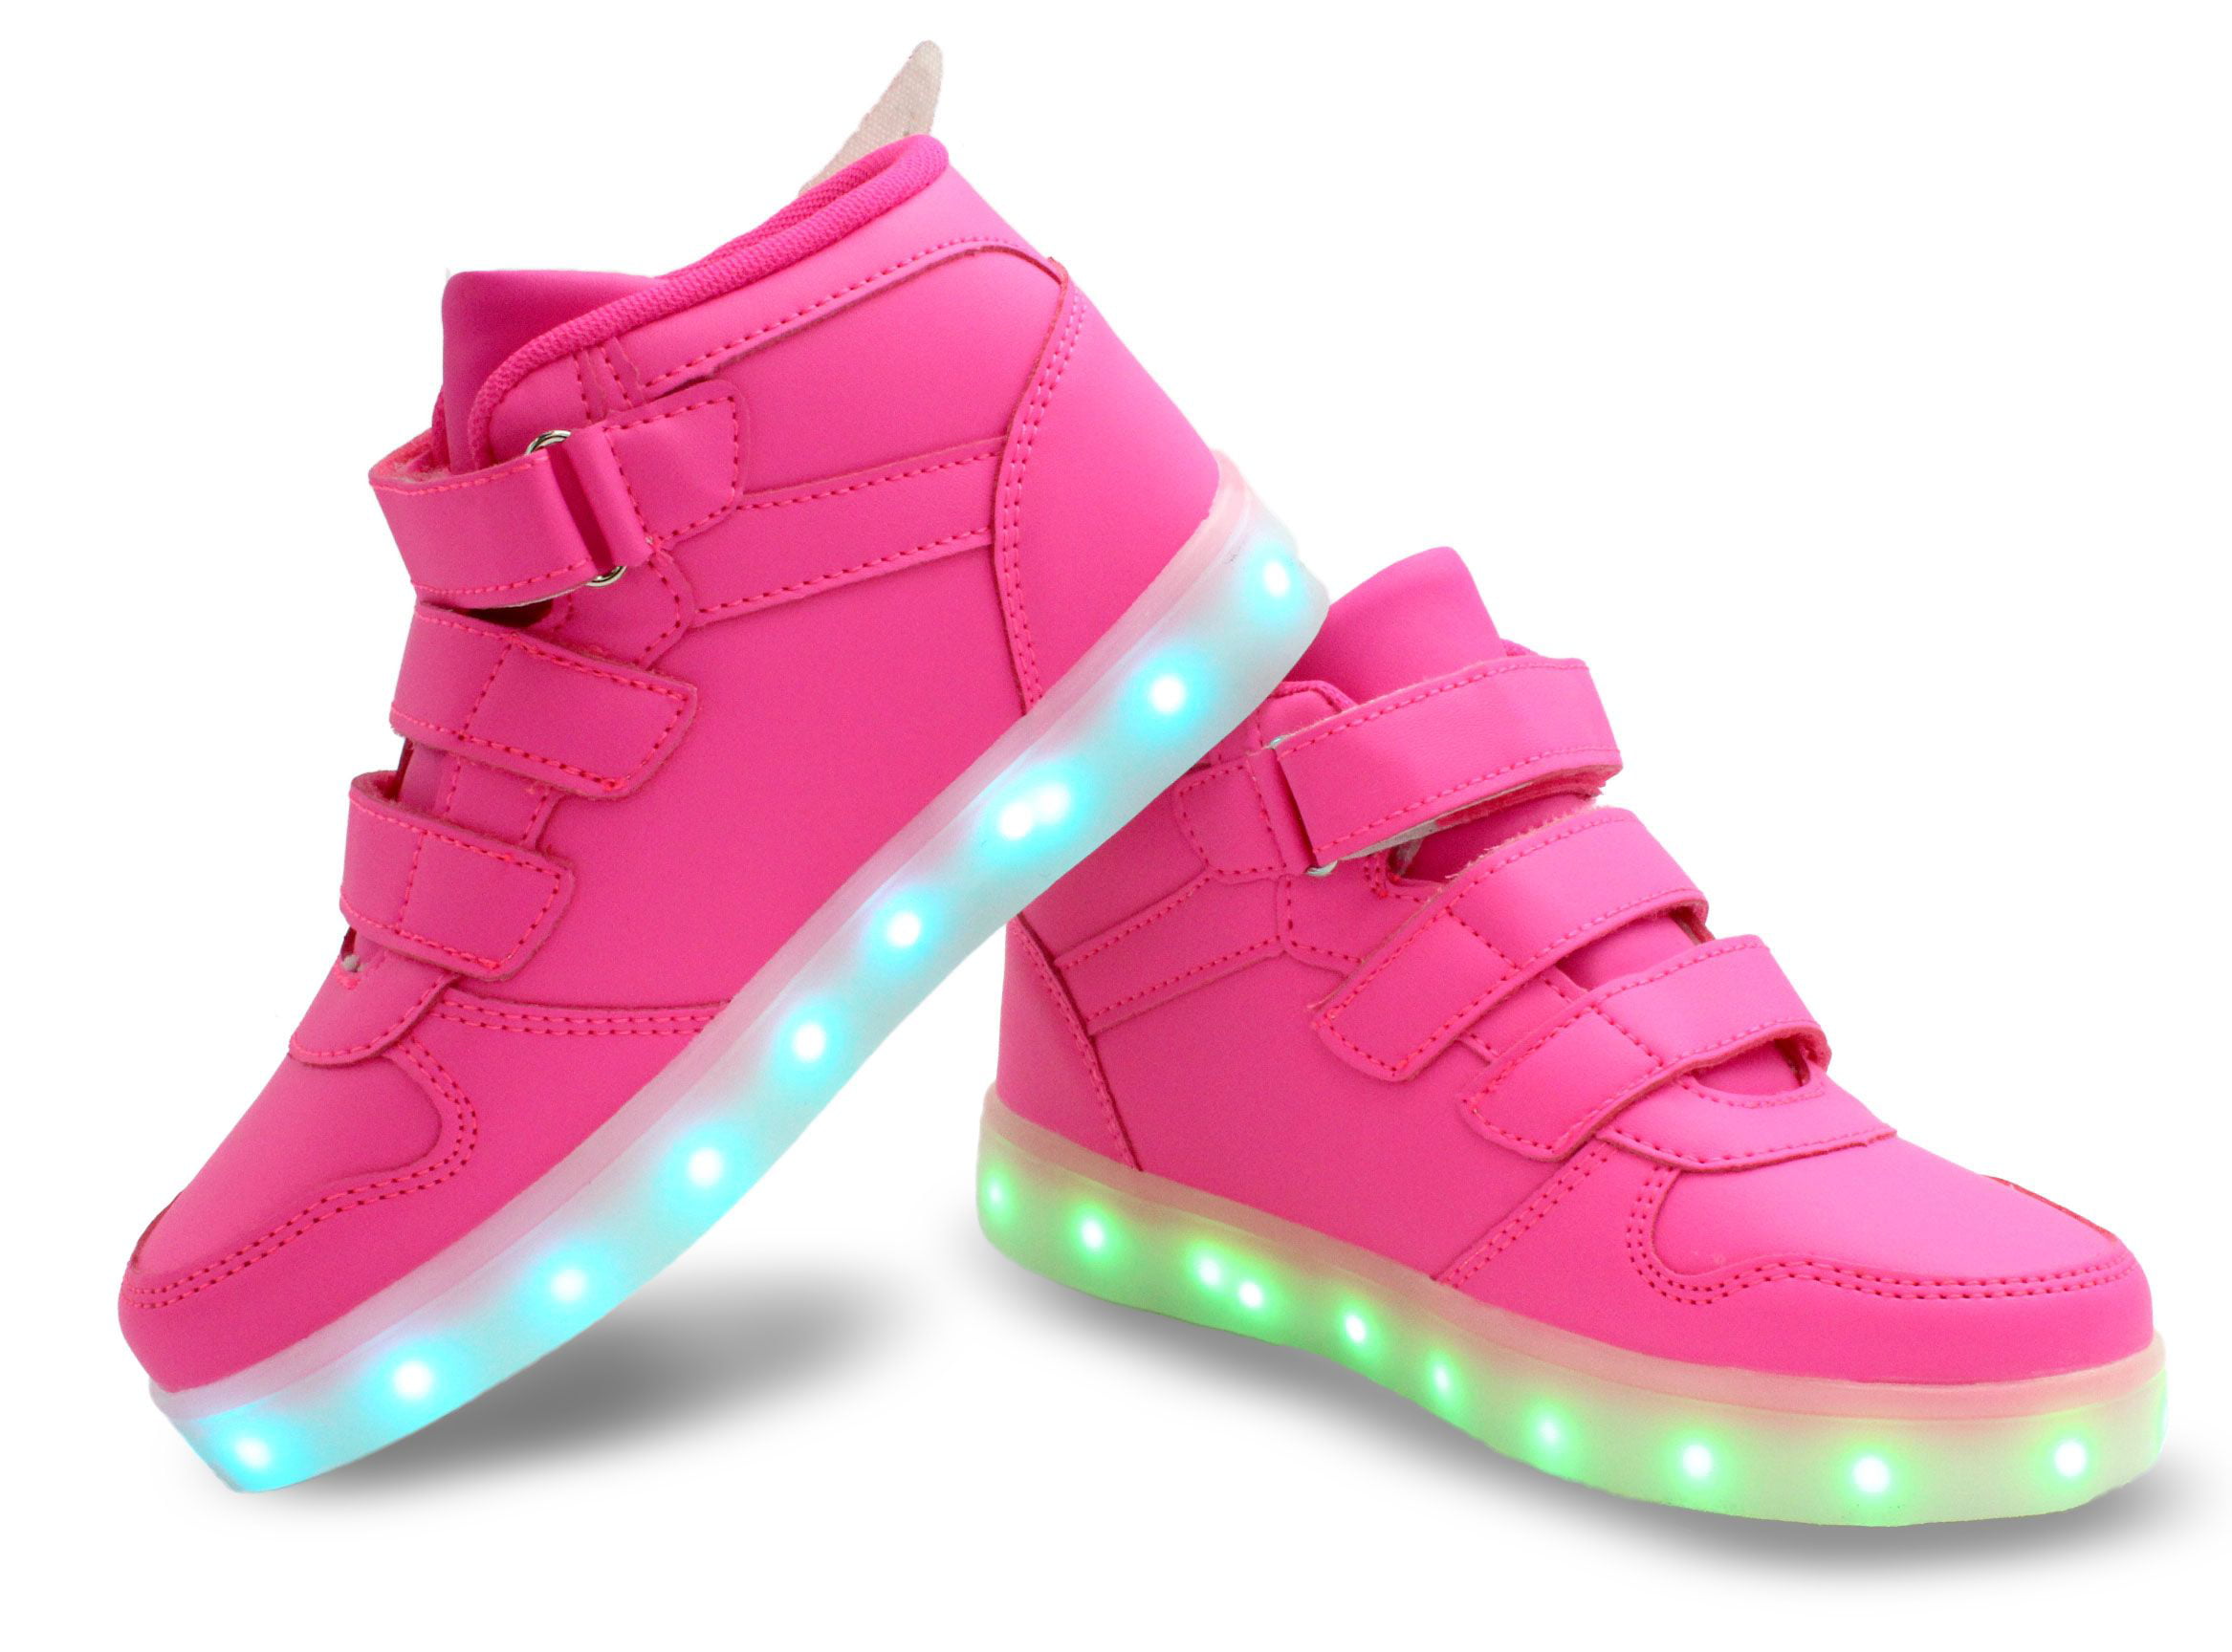 Silver 31/13 xiaoyang High Top USB Charging LED Shoes Flashing Fashion Sneakers for Kids Boots Girls Boys